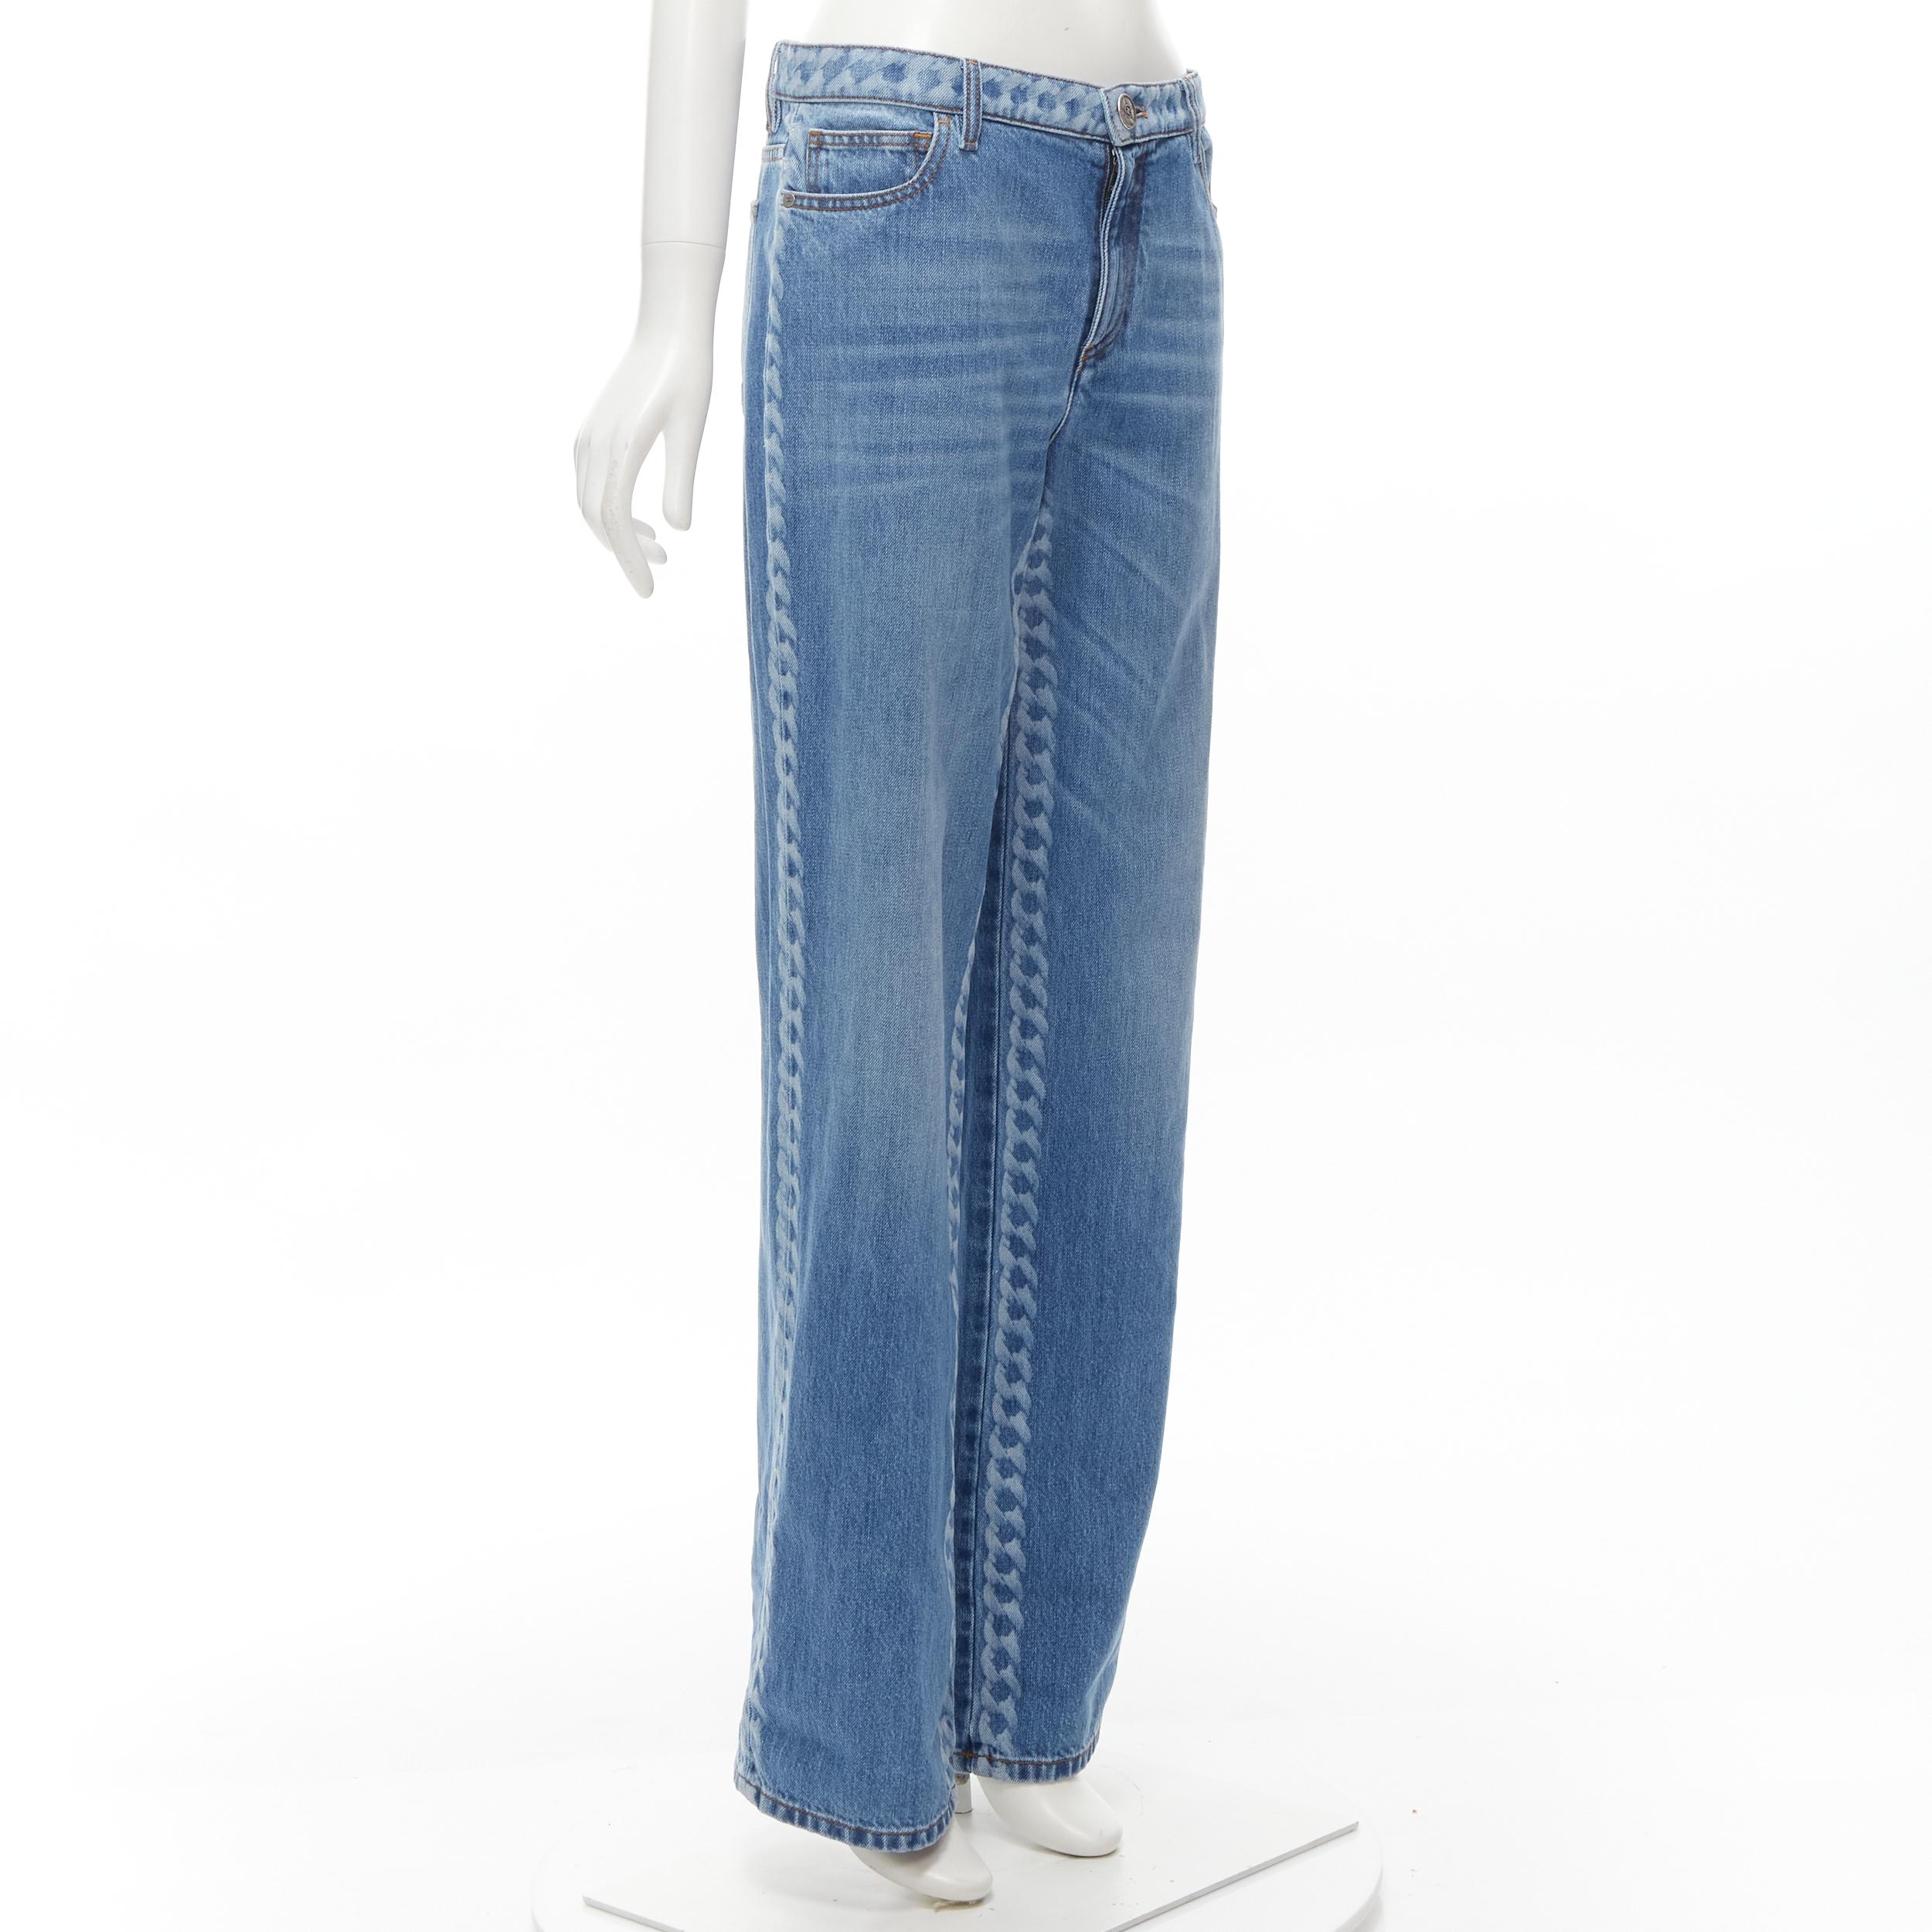 CHANEL 19P blue denim chunky chain washed straight leg jeans FR40 M
Brand: Chanel
Collection: 19P 
Material: Denim
Color: Blue
Pattern: Solid
Closure: Zip
Extra Detail: Chunky chain link 'wash' trim along waist and down leg. Antique silver CC button